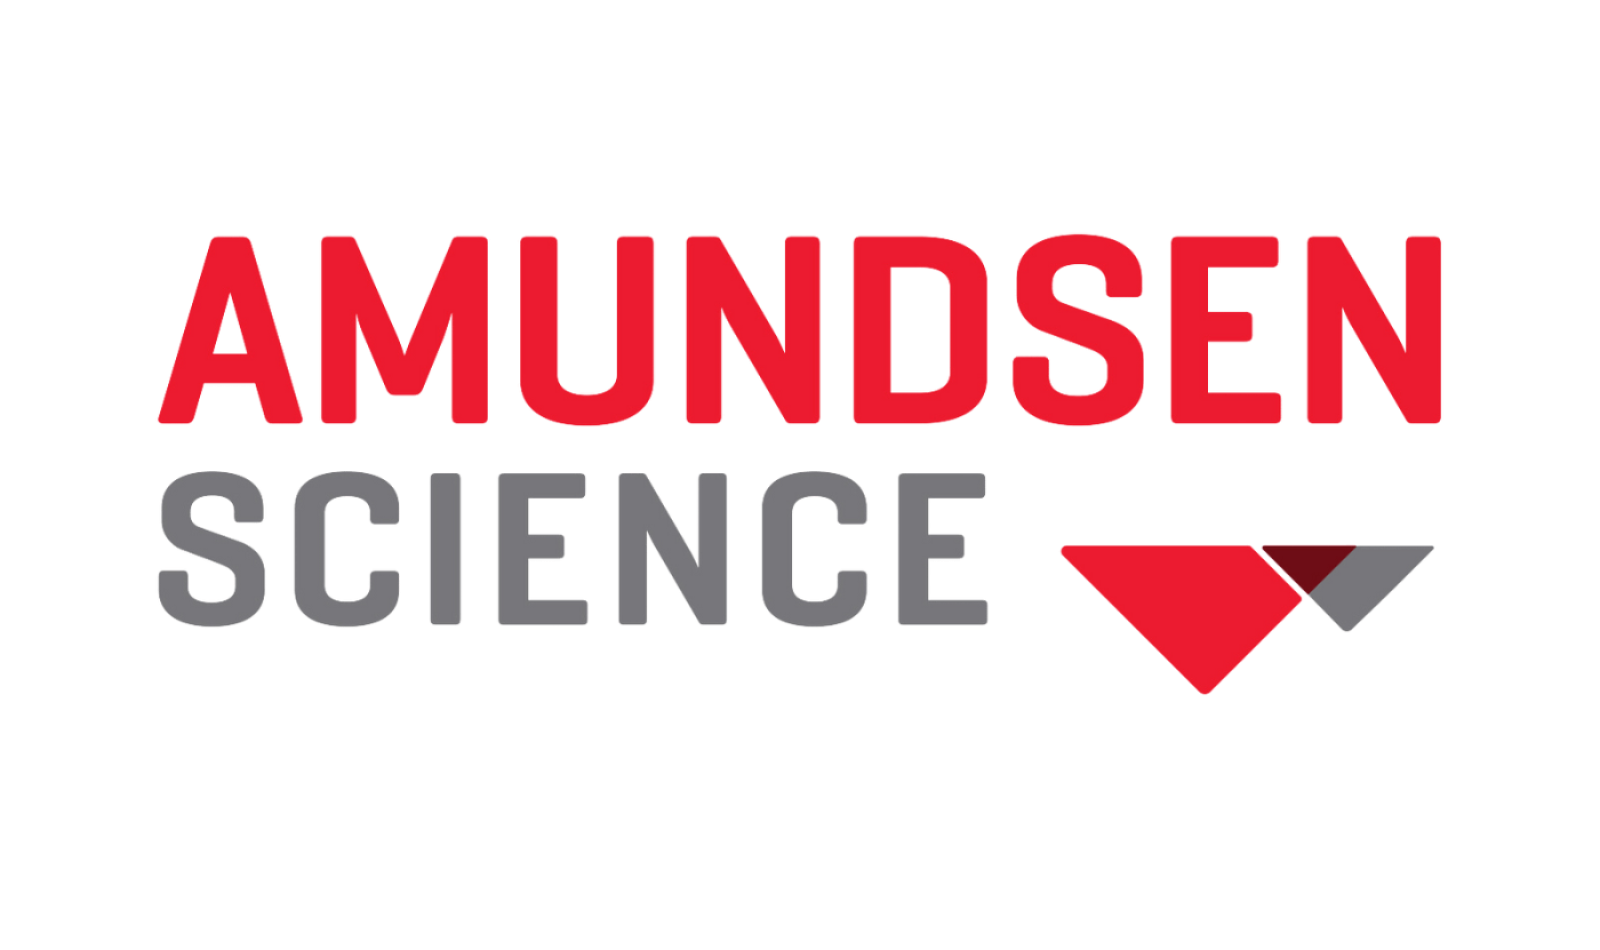 Amundsen Science Planning Workshop and Research Symposium and Collaborations